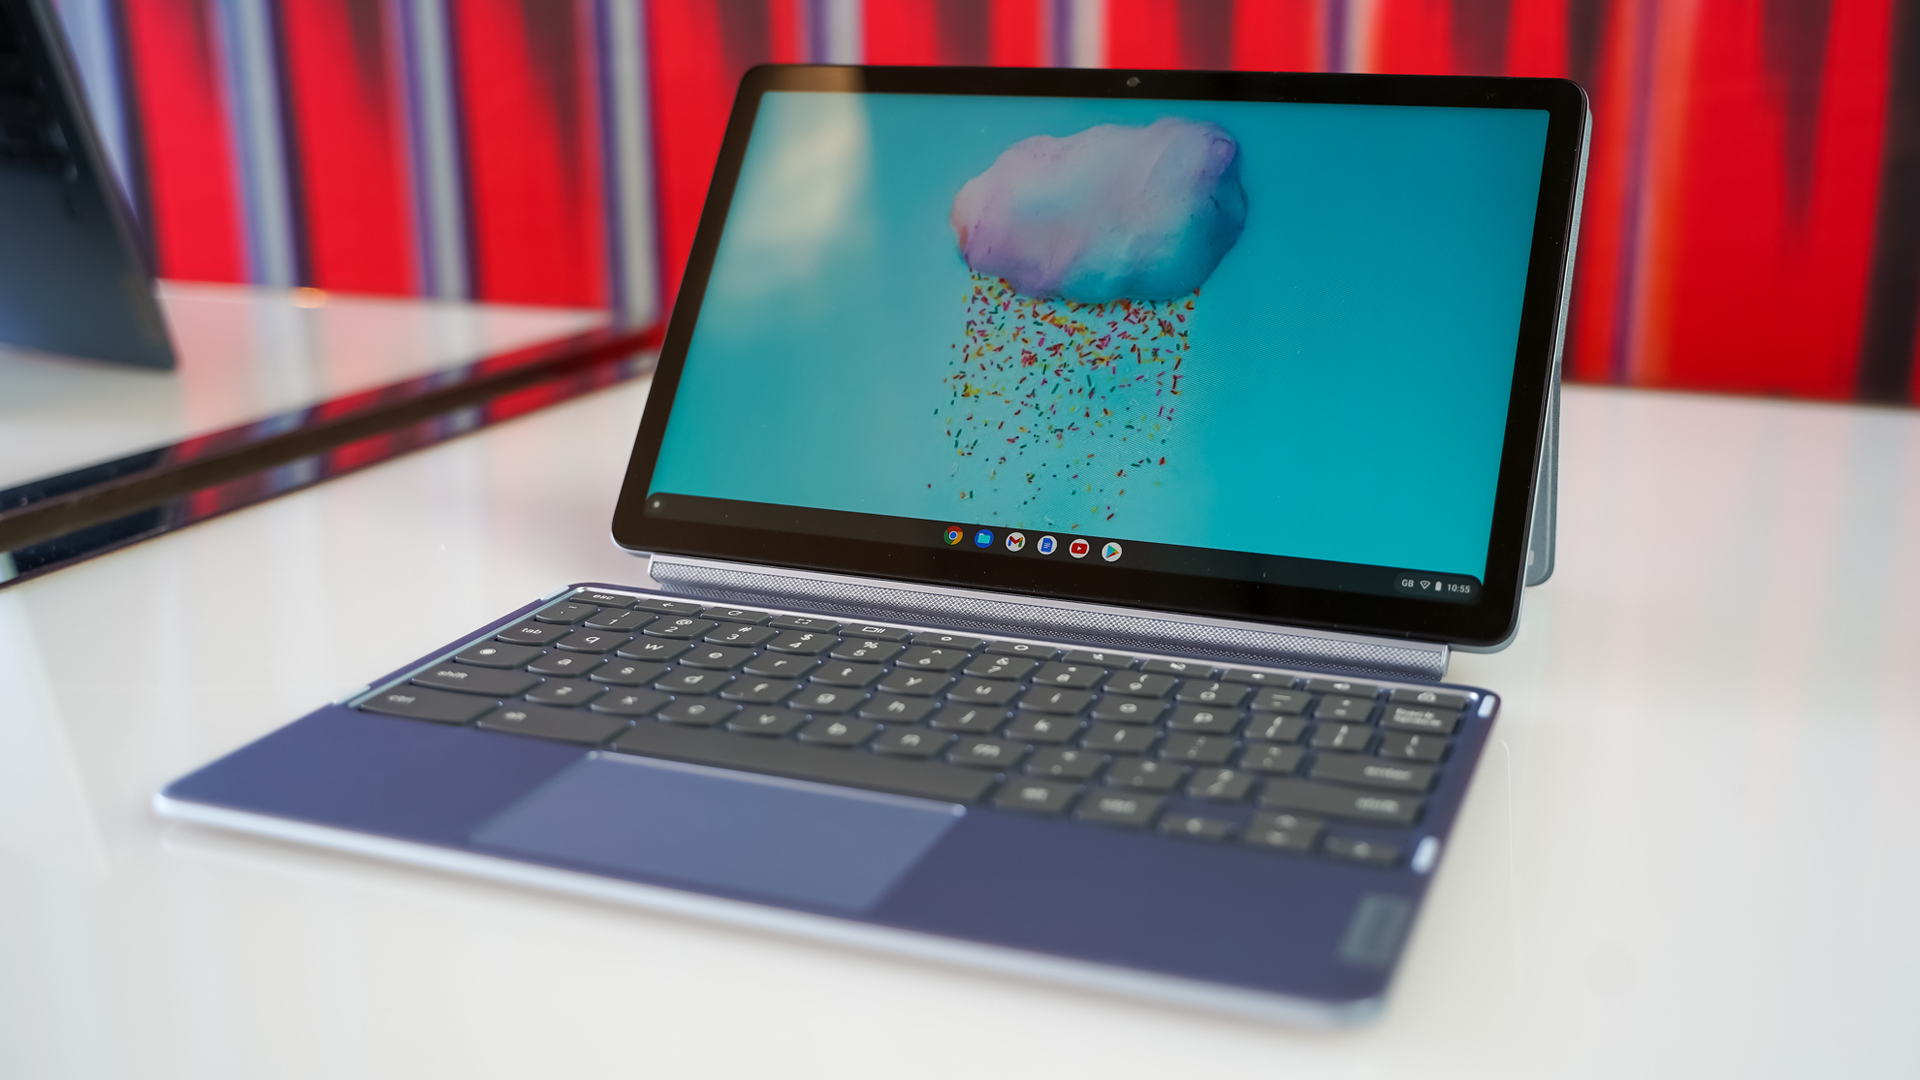 Lenovo upgrades Duet 3 Chromebook with 2K display, but lowers price from Duet 5